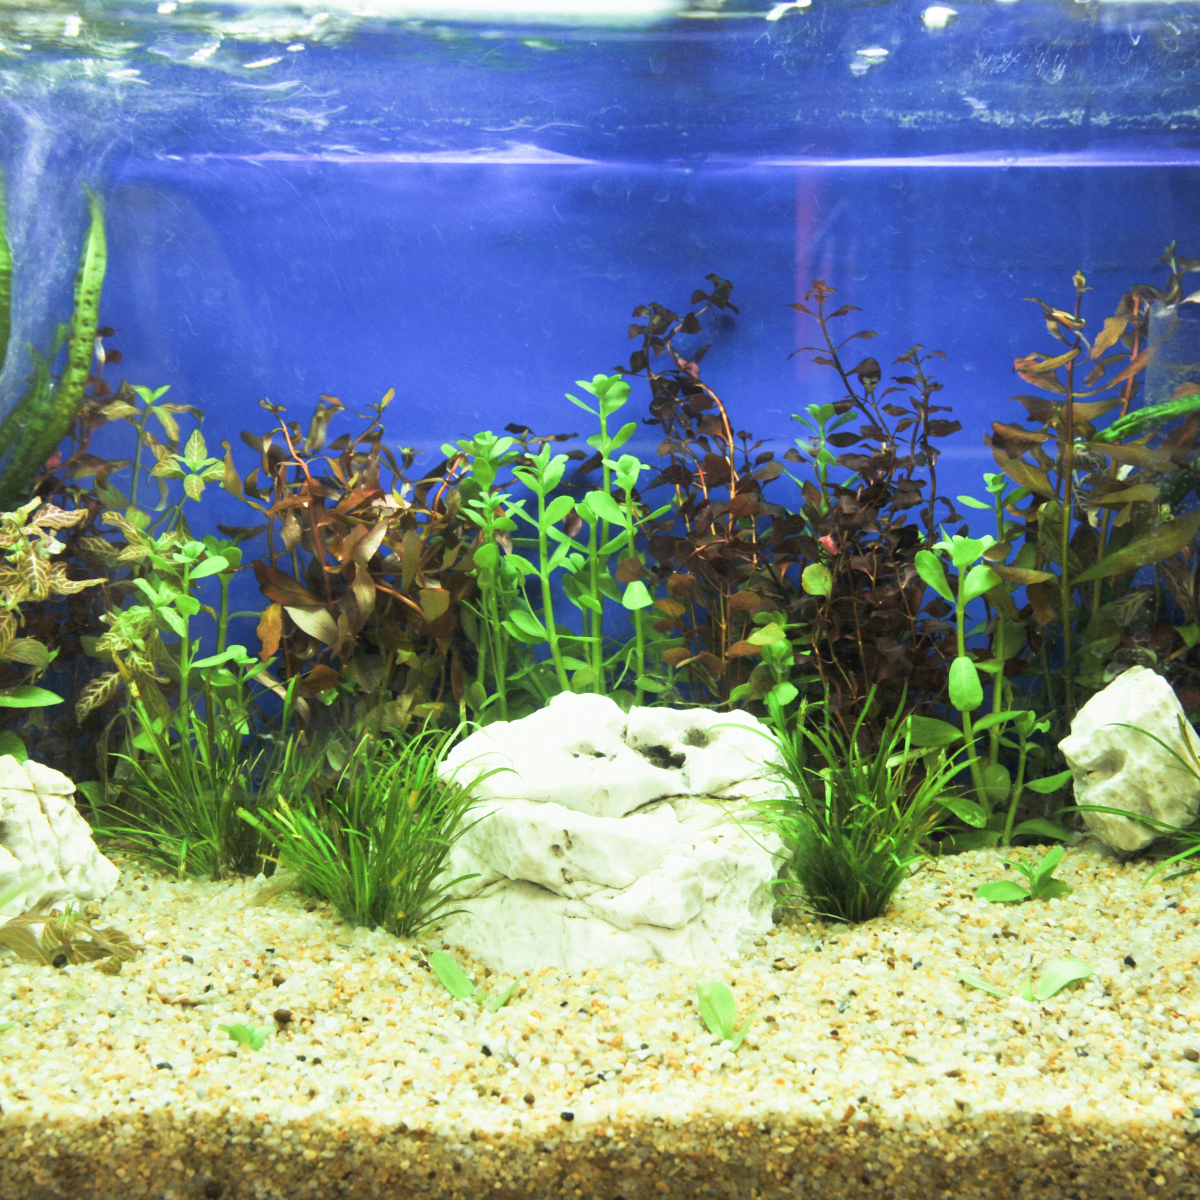 How to Get Crystal Clear Aquarium Water - 7 Easy to Follow Steps